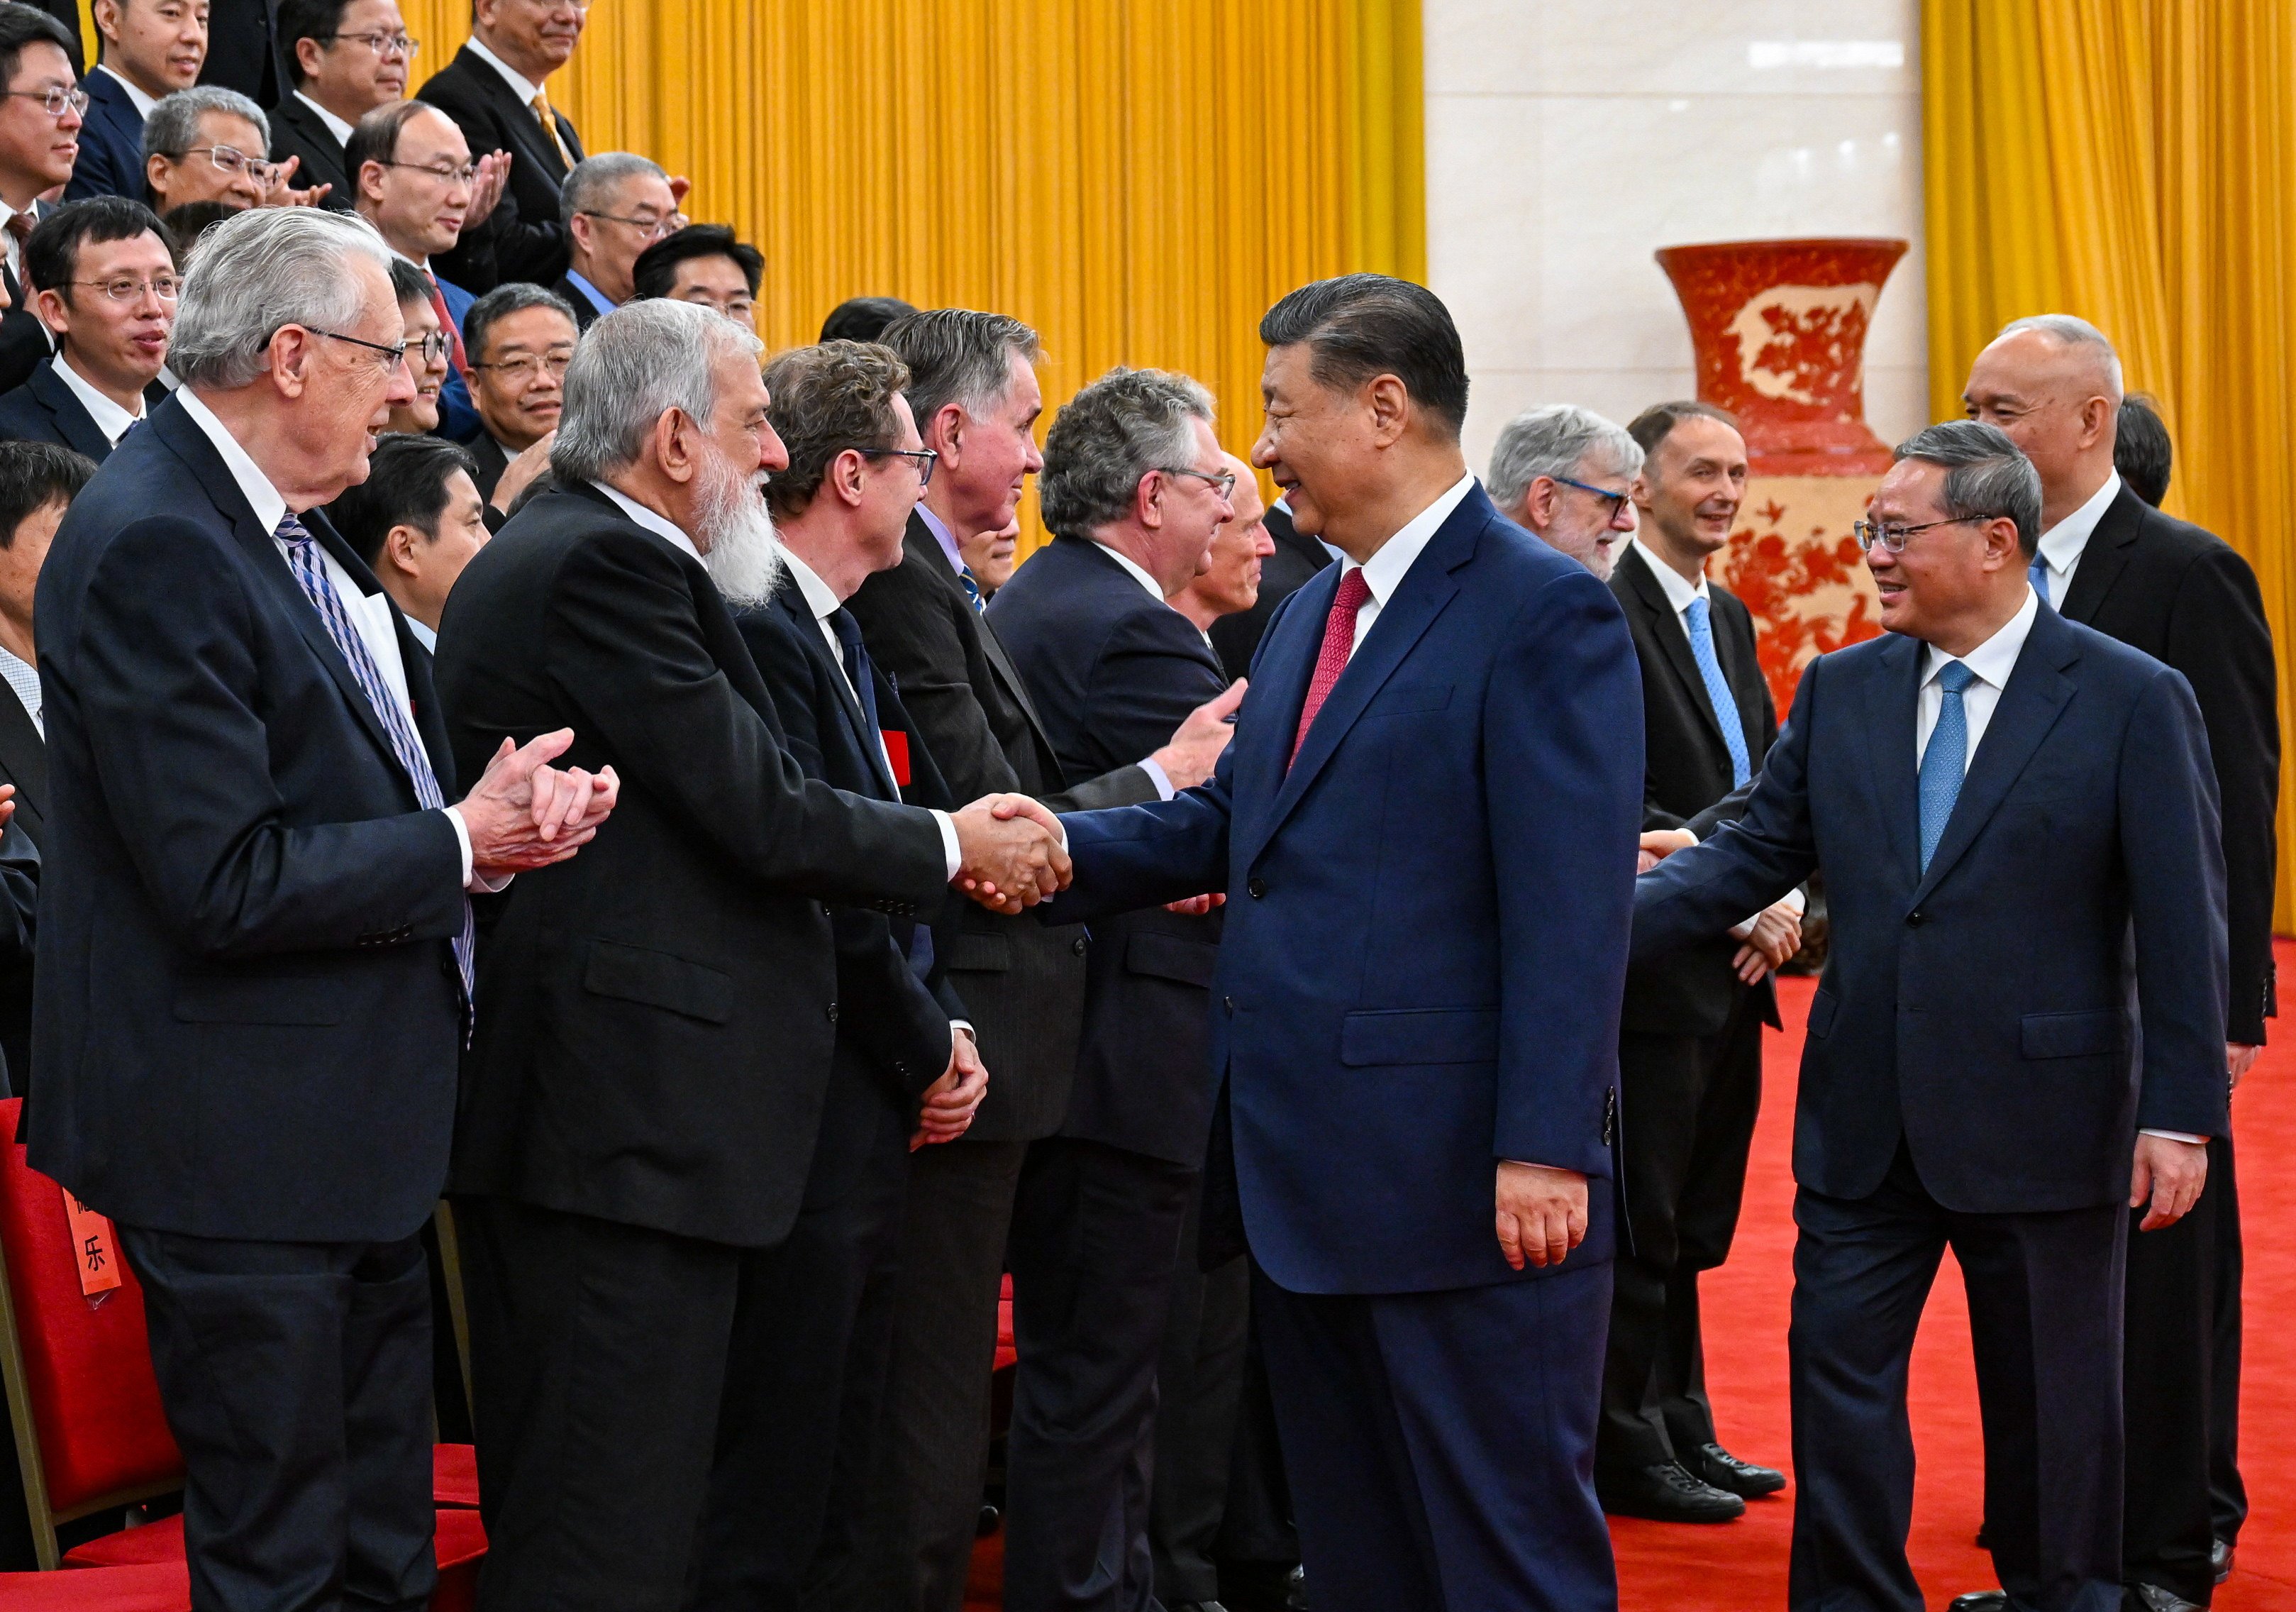 President Xi Jinping and other Politburo Standing Committee members meet representatives of the science award winners at the Great Hall of the People in Beijing on Monday. Photo: Xinhua